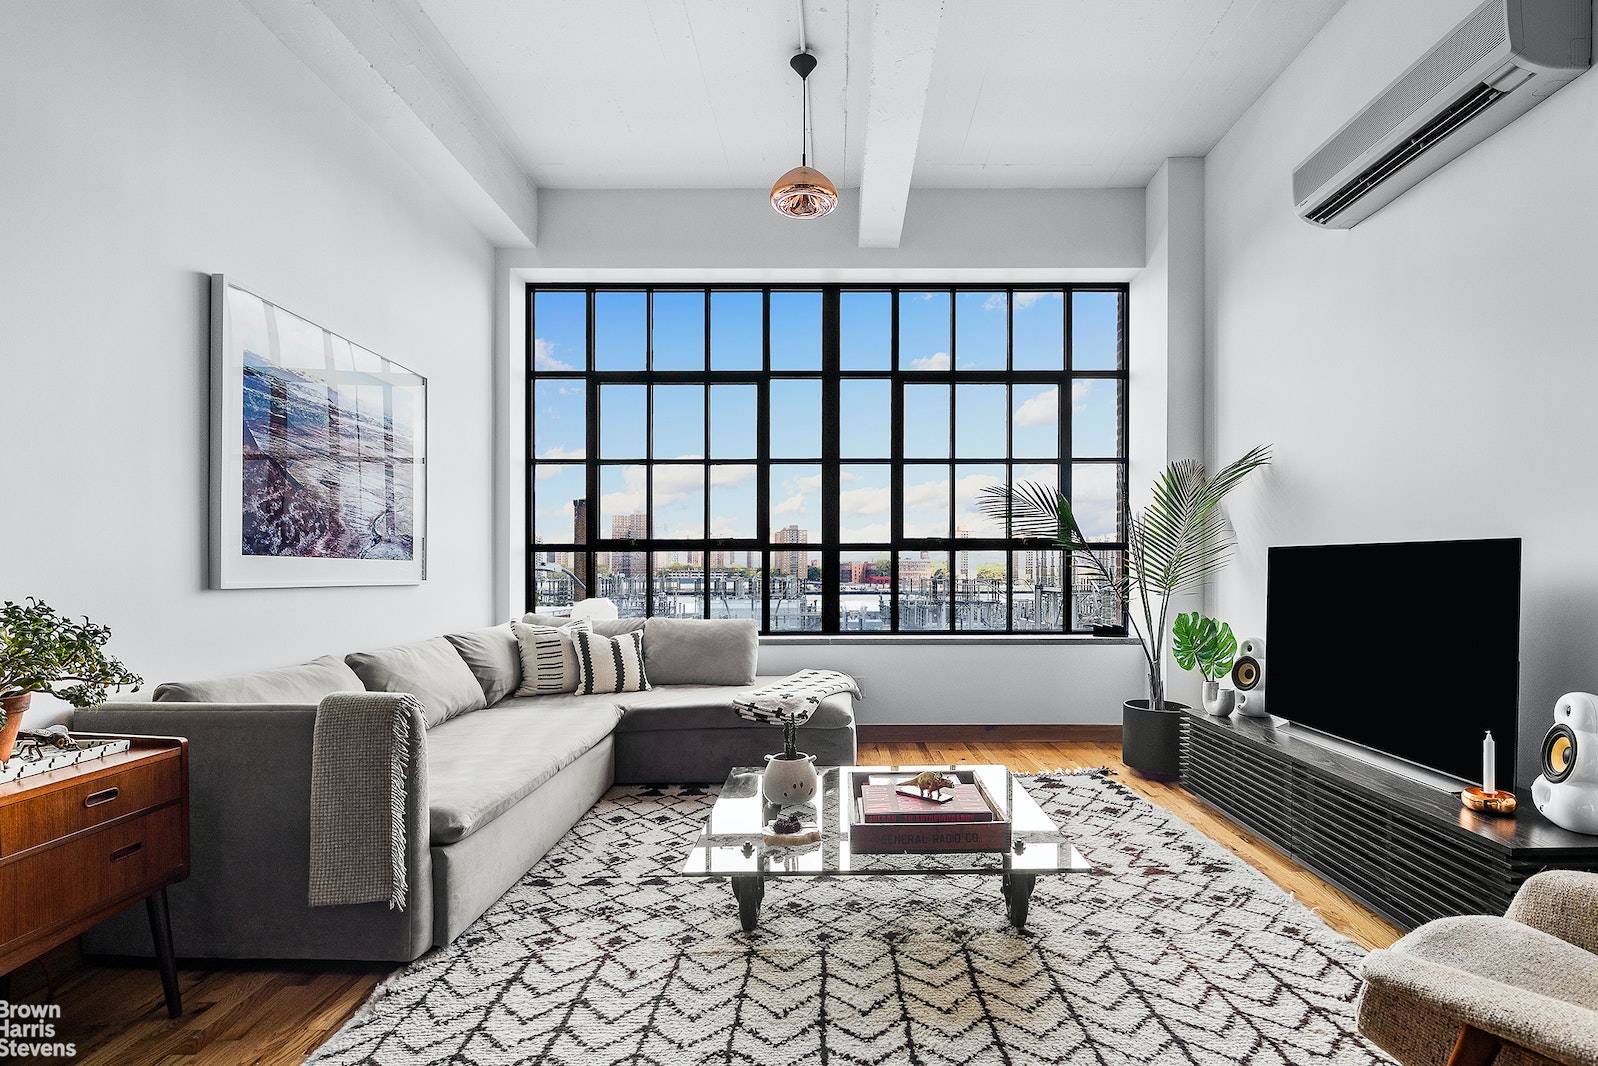 At the highly sought after KIRKMAN LOFTS condominium, the most perfectly charming loft awaits.